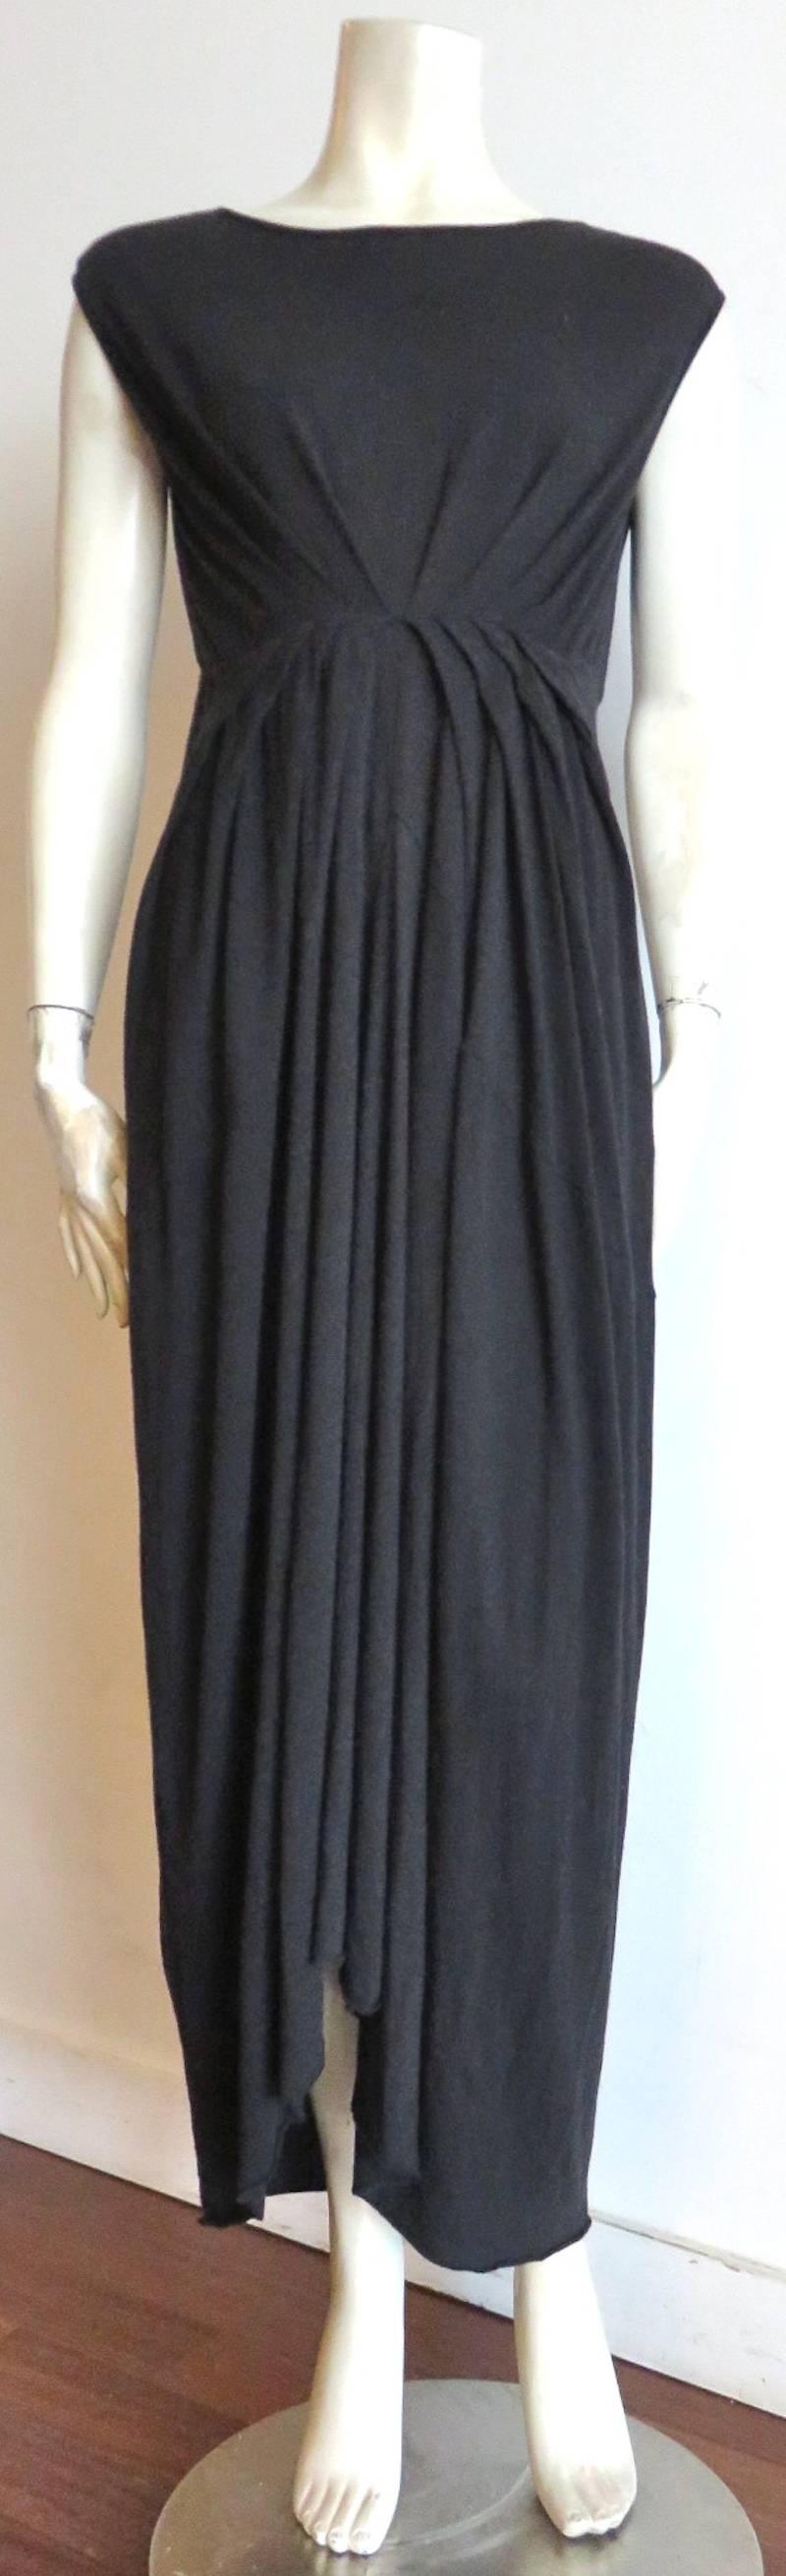 New RICK OWENS Wool angora jersey dress.

Stretchy black knit fabrication featuring, 'sunburst' style pleated design at front, empire waist.

Boatneck opening.

New with tags.

Made in Italy, as labeled.

*MEASUREMENTS*

IT LABEL 40, US